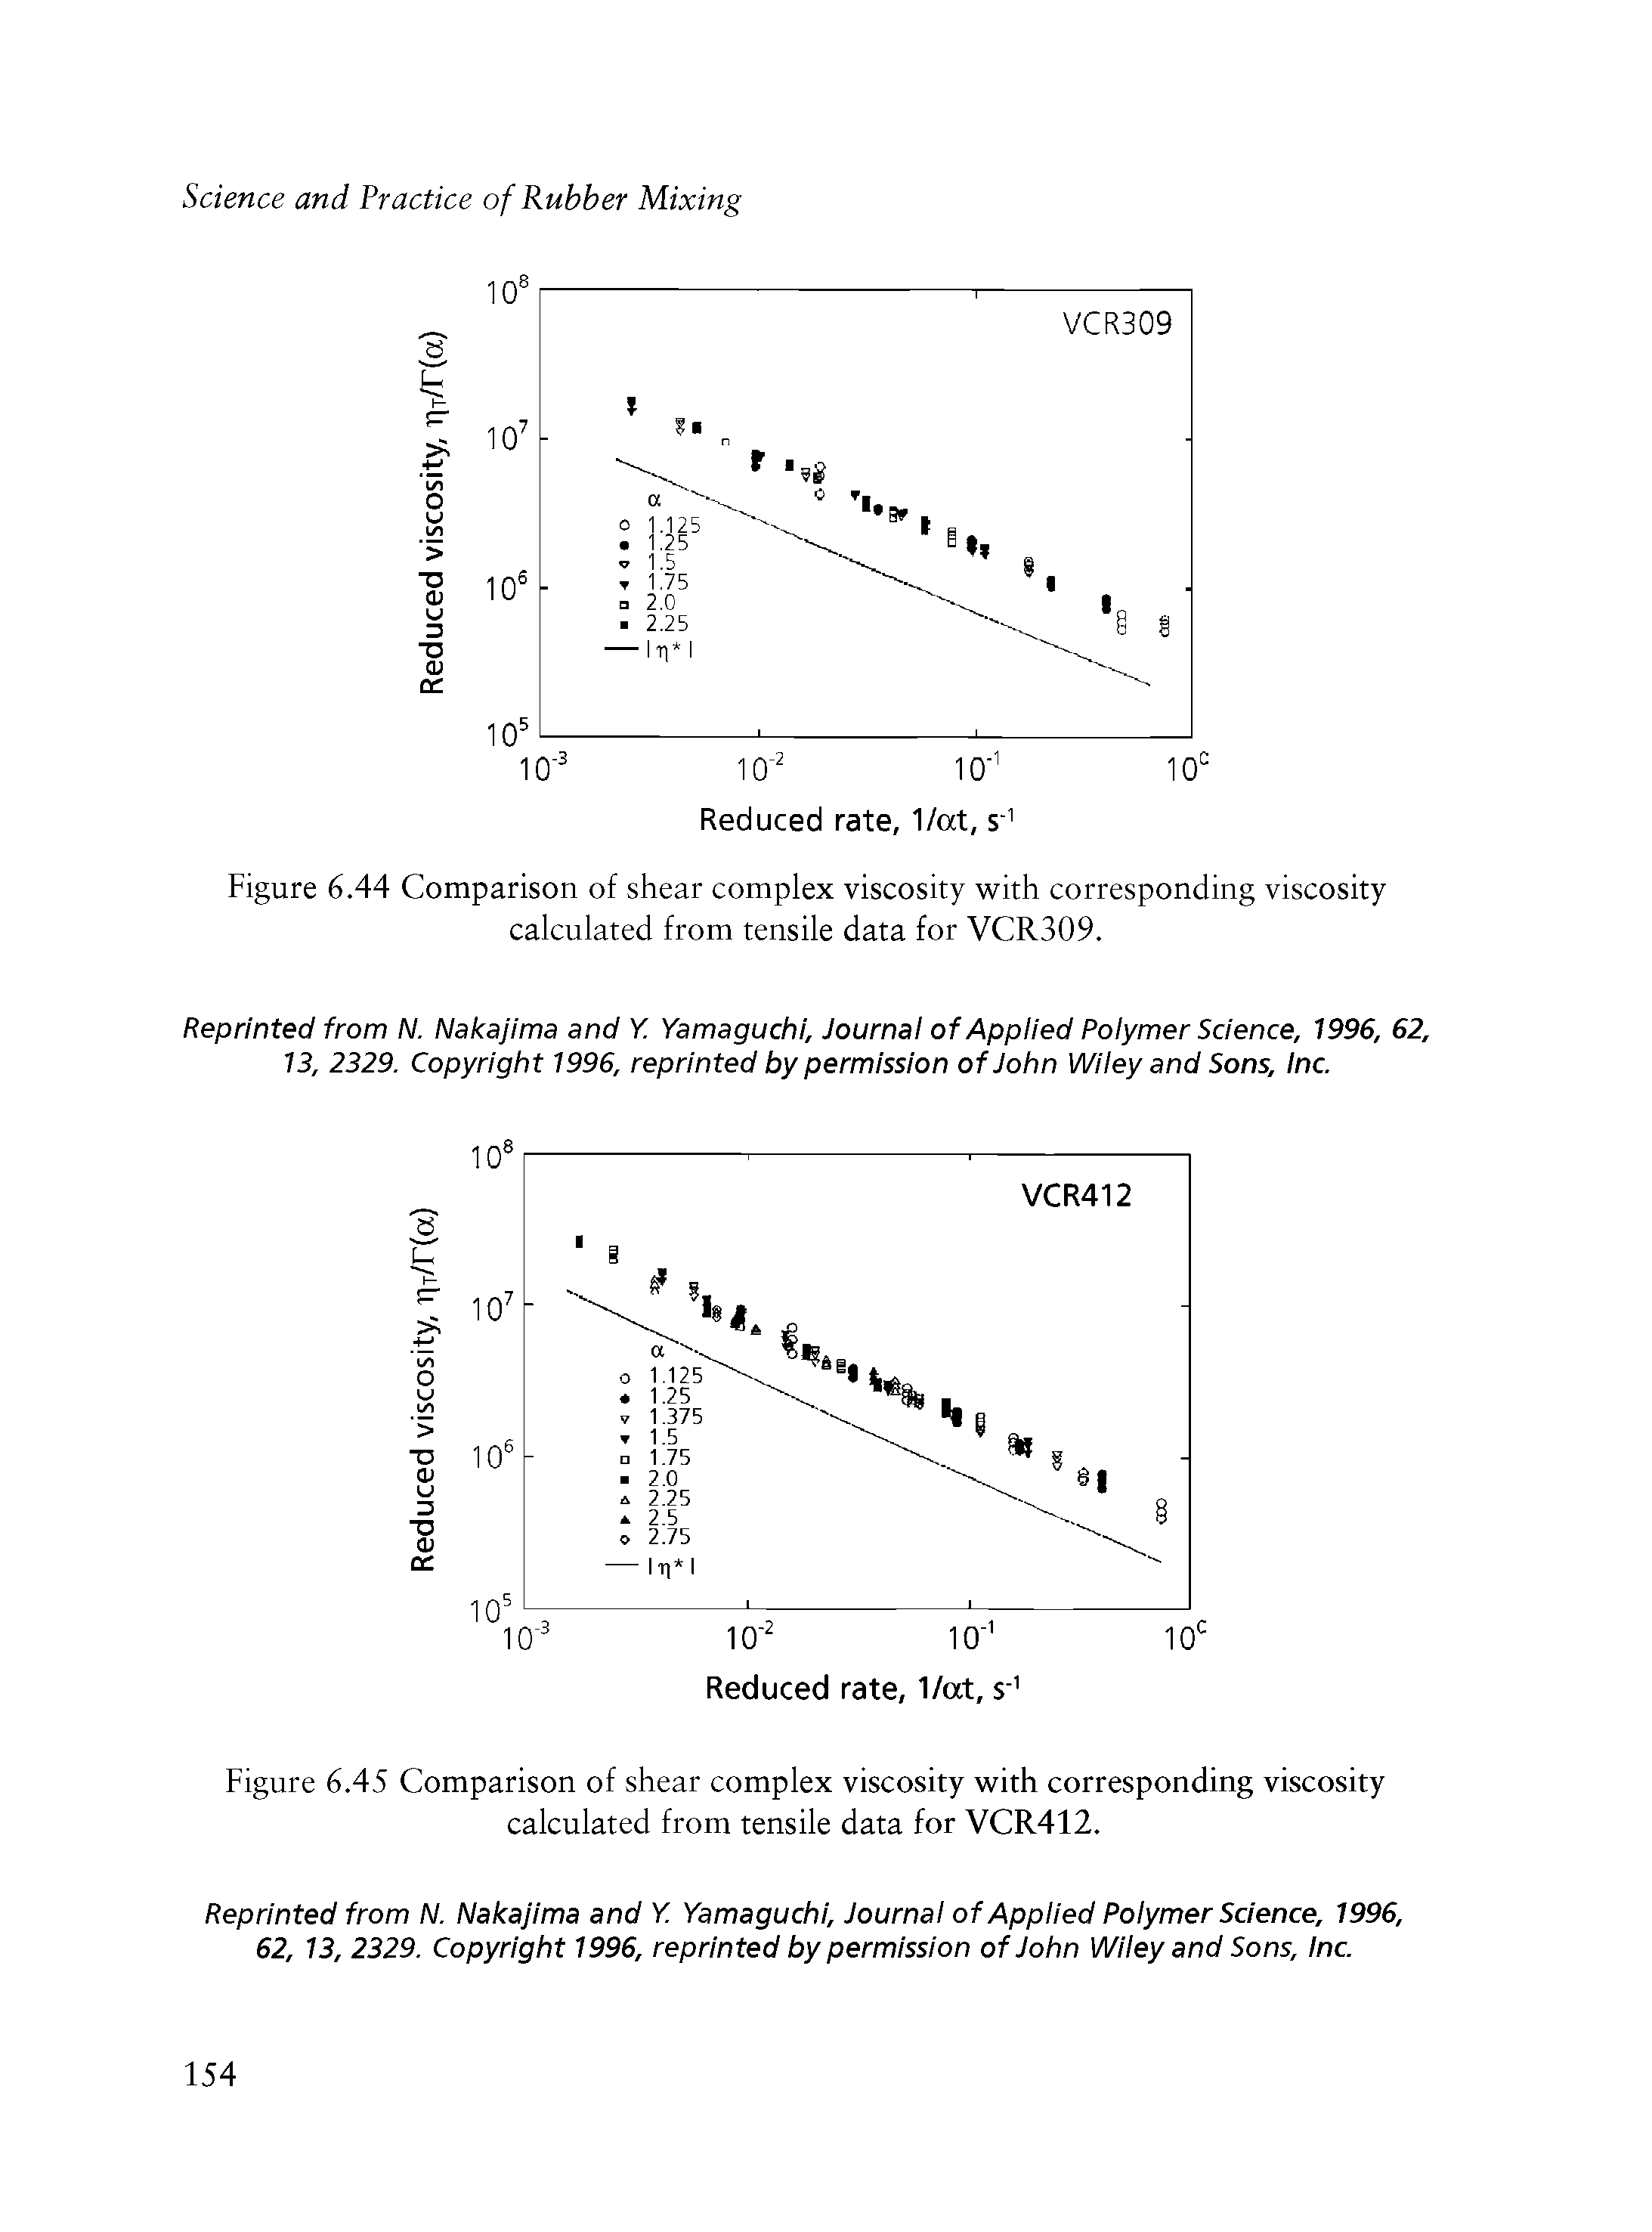 Figure 6.44 Comparison of shear complex viscosity with corresponding viscosity calculated from tensile data for VCR309.